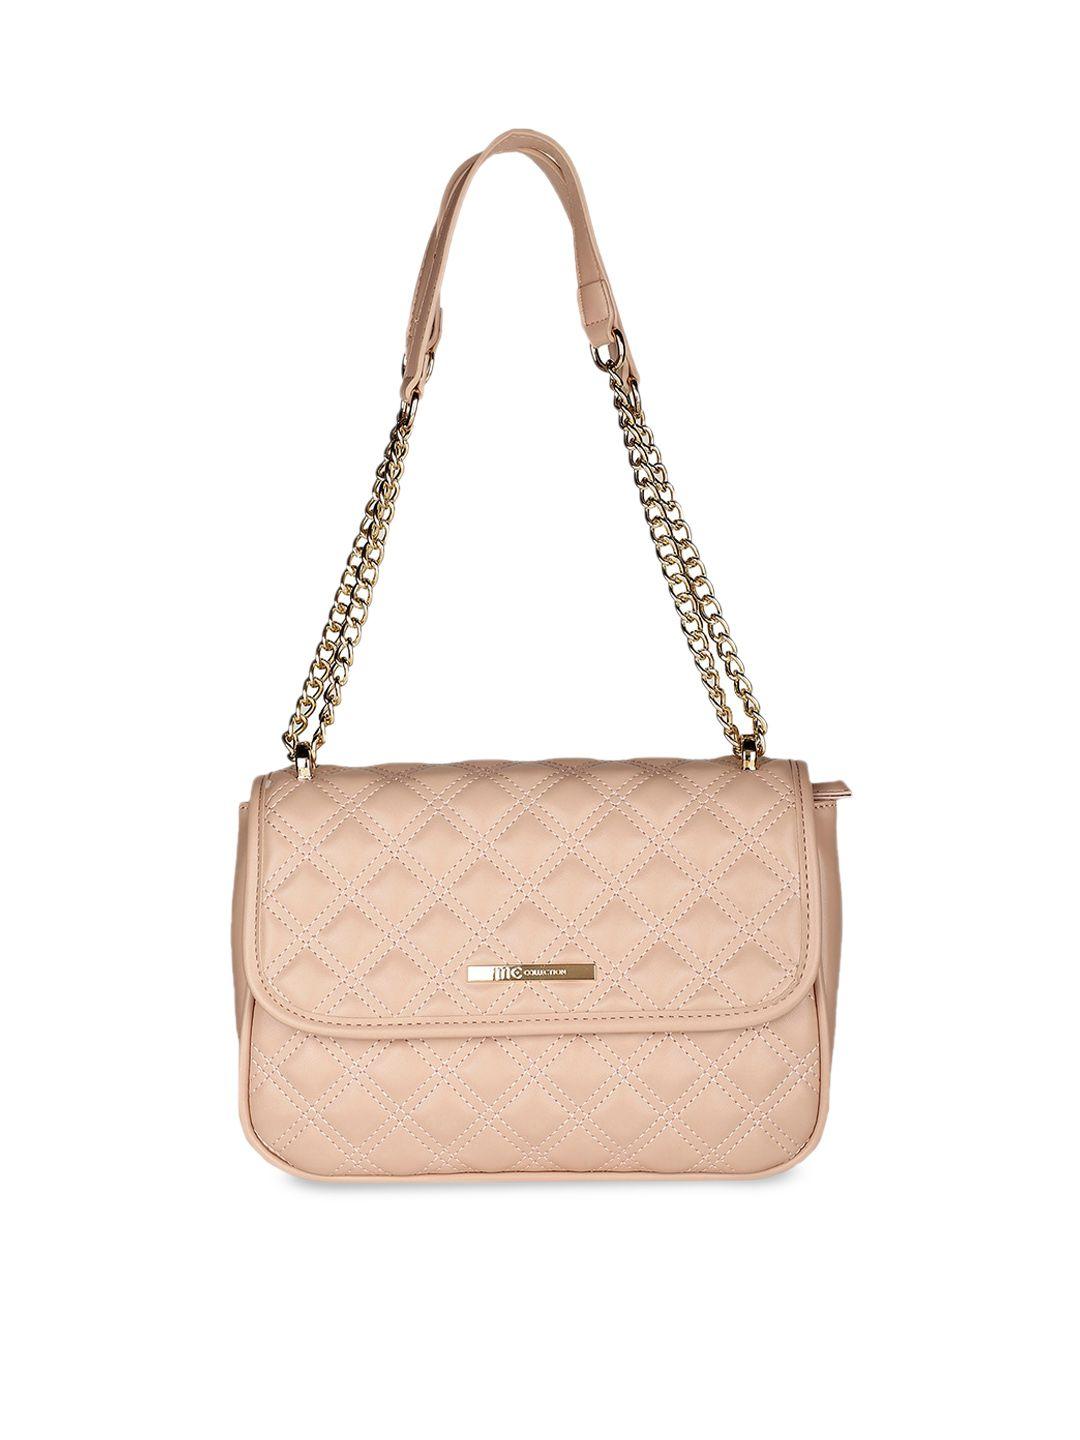 marie claire pink leather structured shoulder bag with quilted